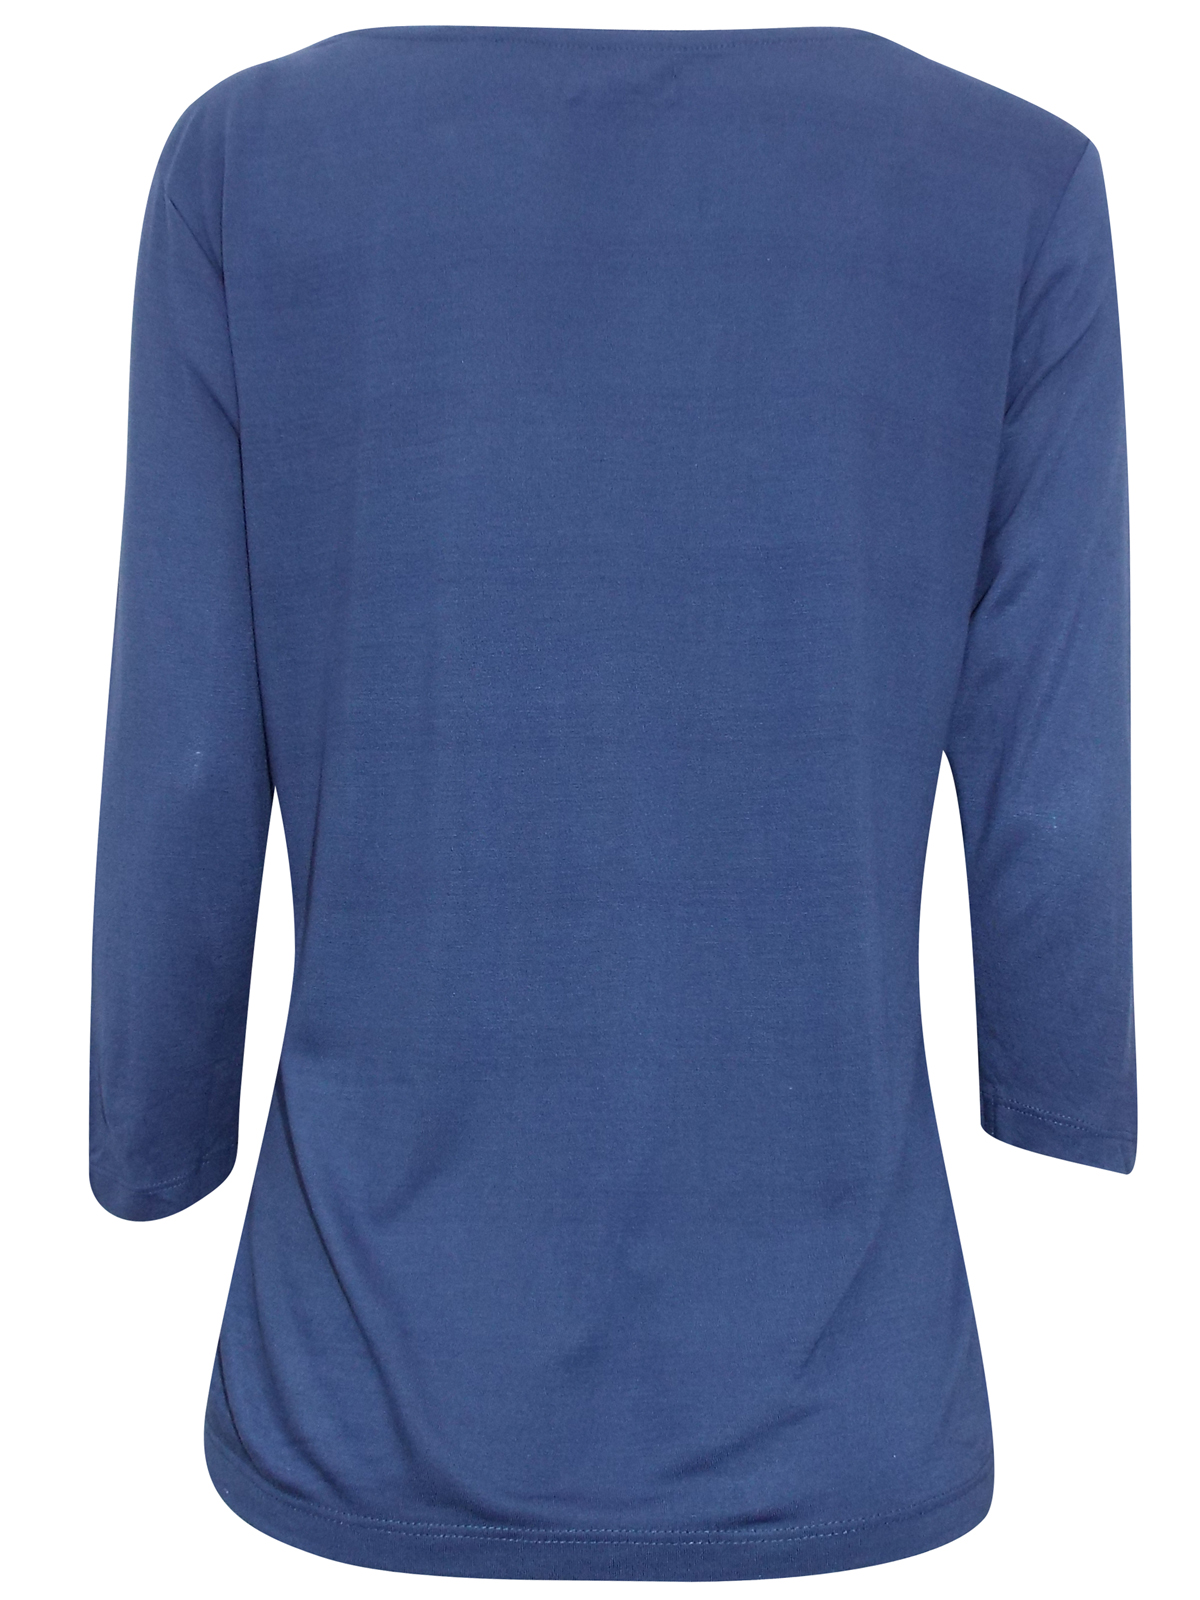 Gill - - Gill BLUE Scoop Neck 3/4 Sleeve Jersey Top - Size 10/12 to 22/ ...